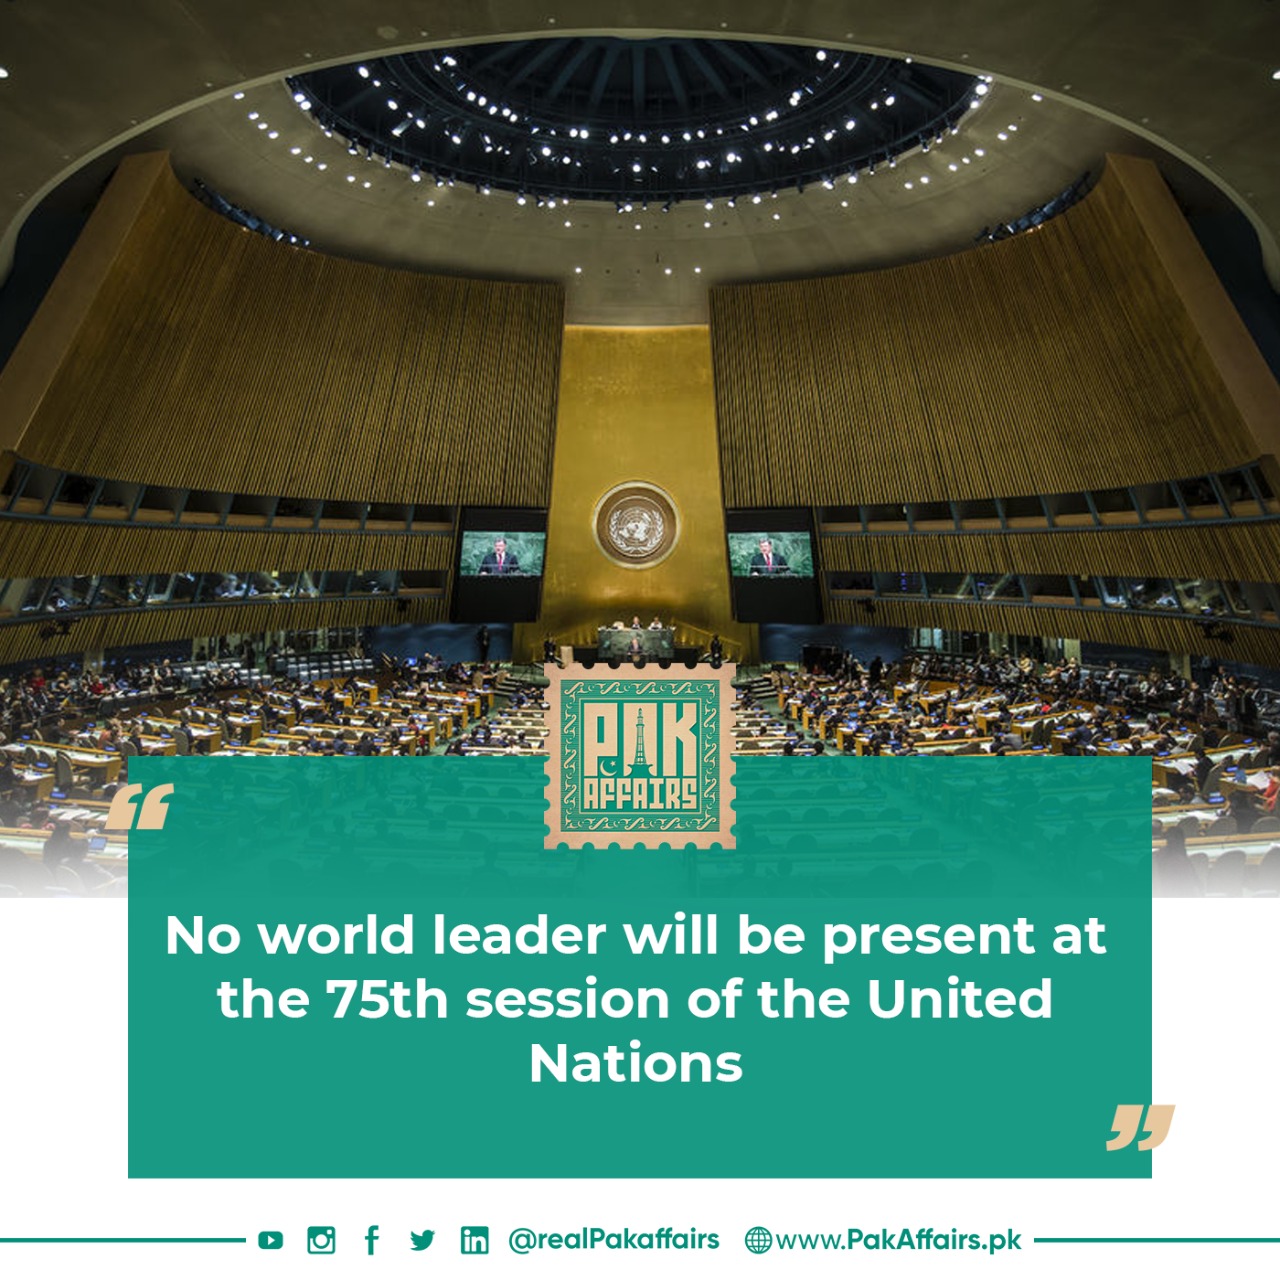 No world leader will be present at the 75th session of the United Nations